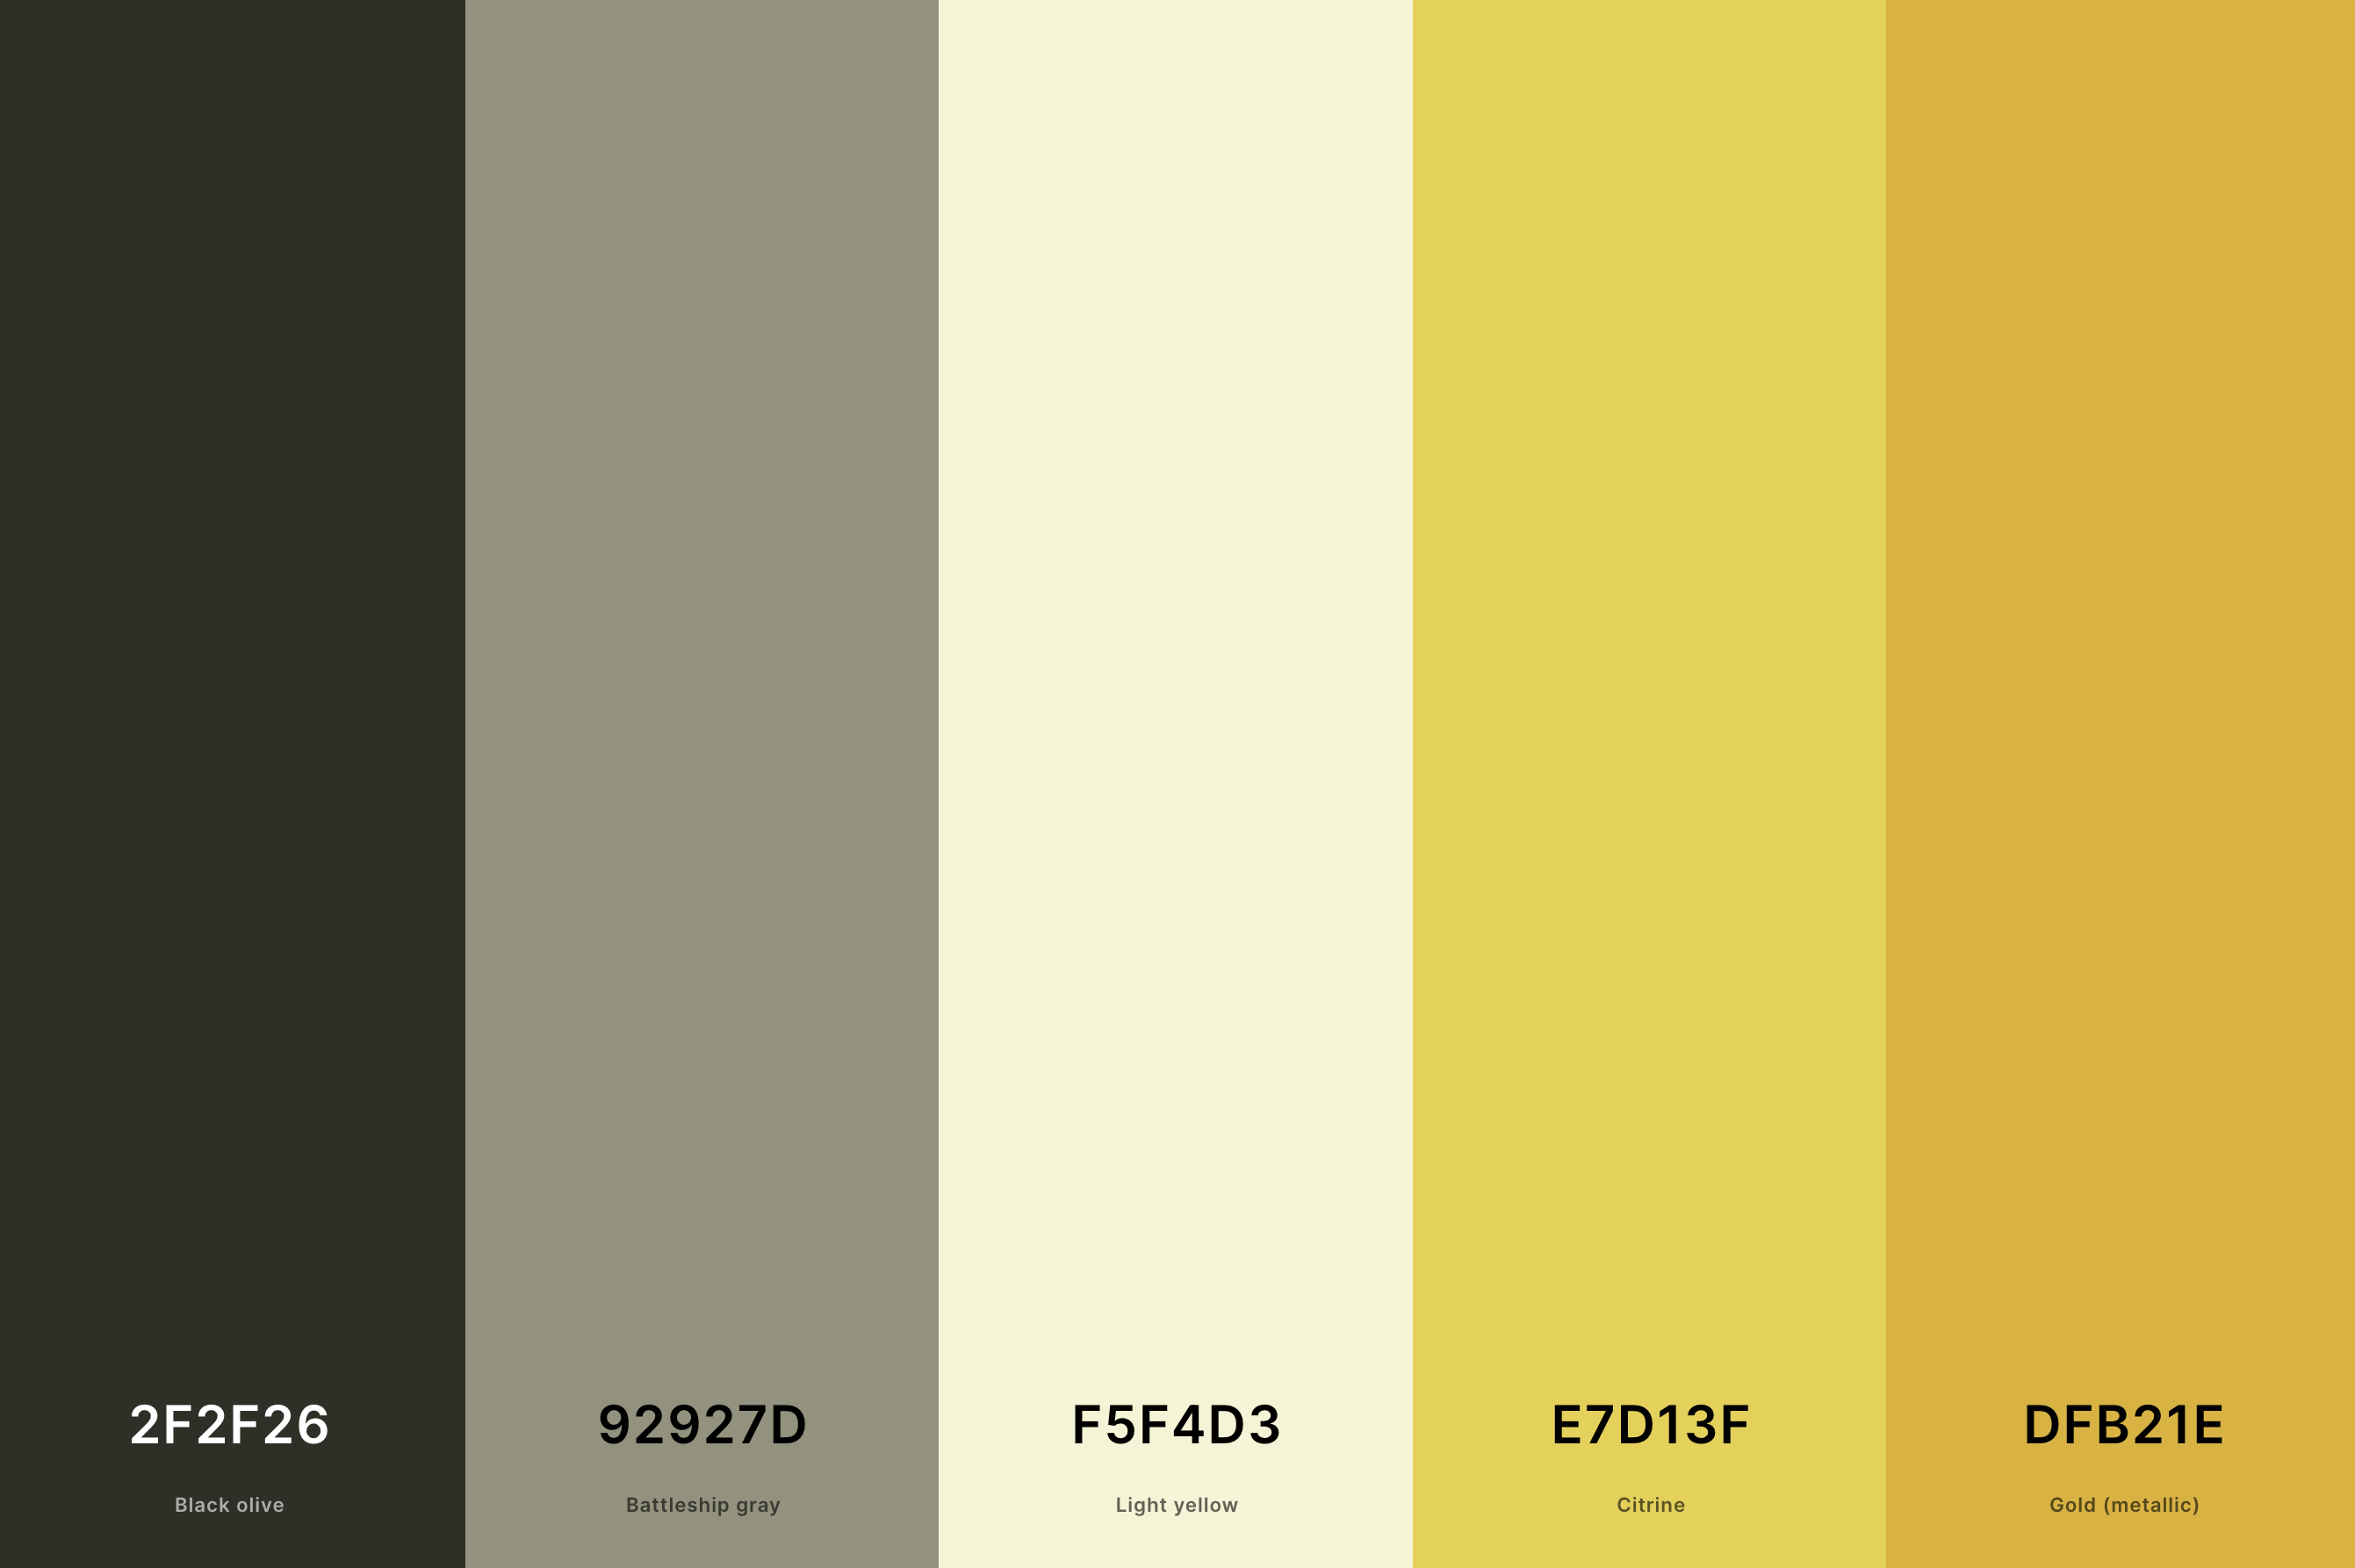 16. Yellow And Gray Color Palette Color Palette with Black Olive (Hex #2F2F26) + Battleship Gray (Hex #92927D) + Light Yellow (Hex #F5F4D3) + Citrine (Hex #E7D13F) + Gold (Metallic) (Hex #DFB21E) Color Palette with Hex Codes